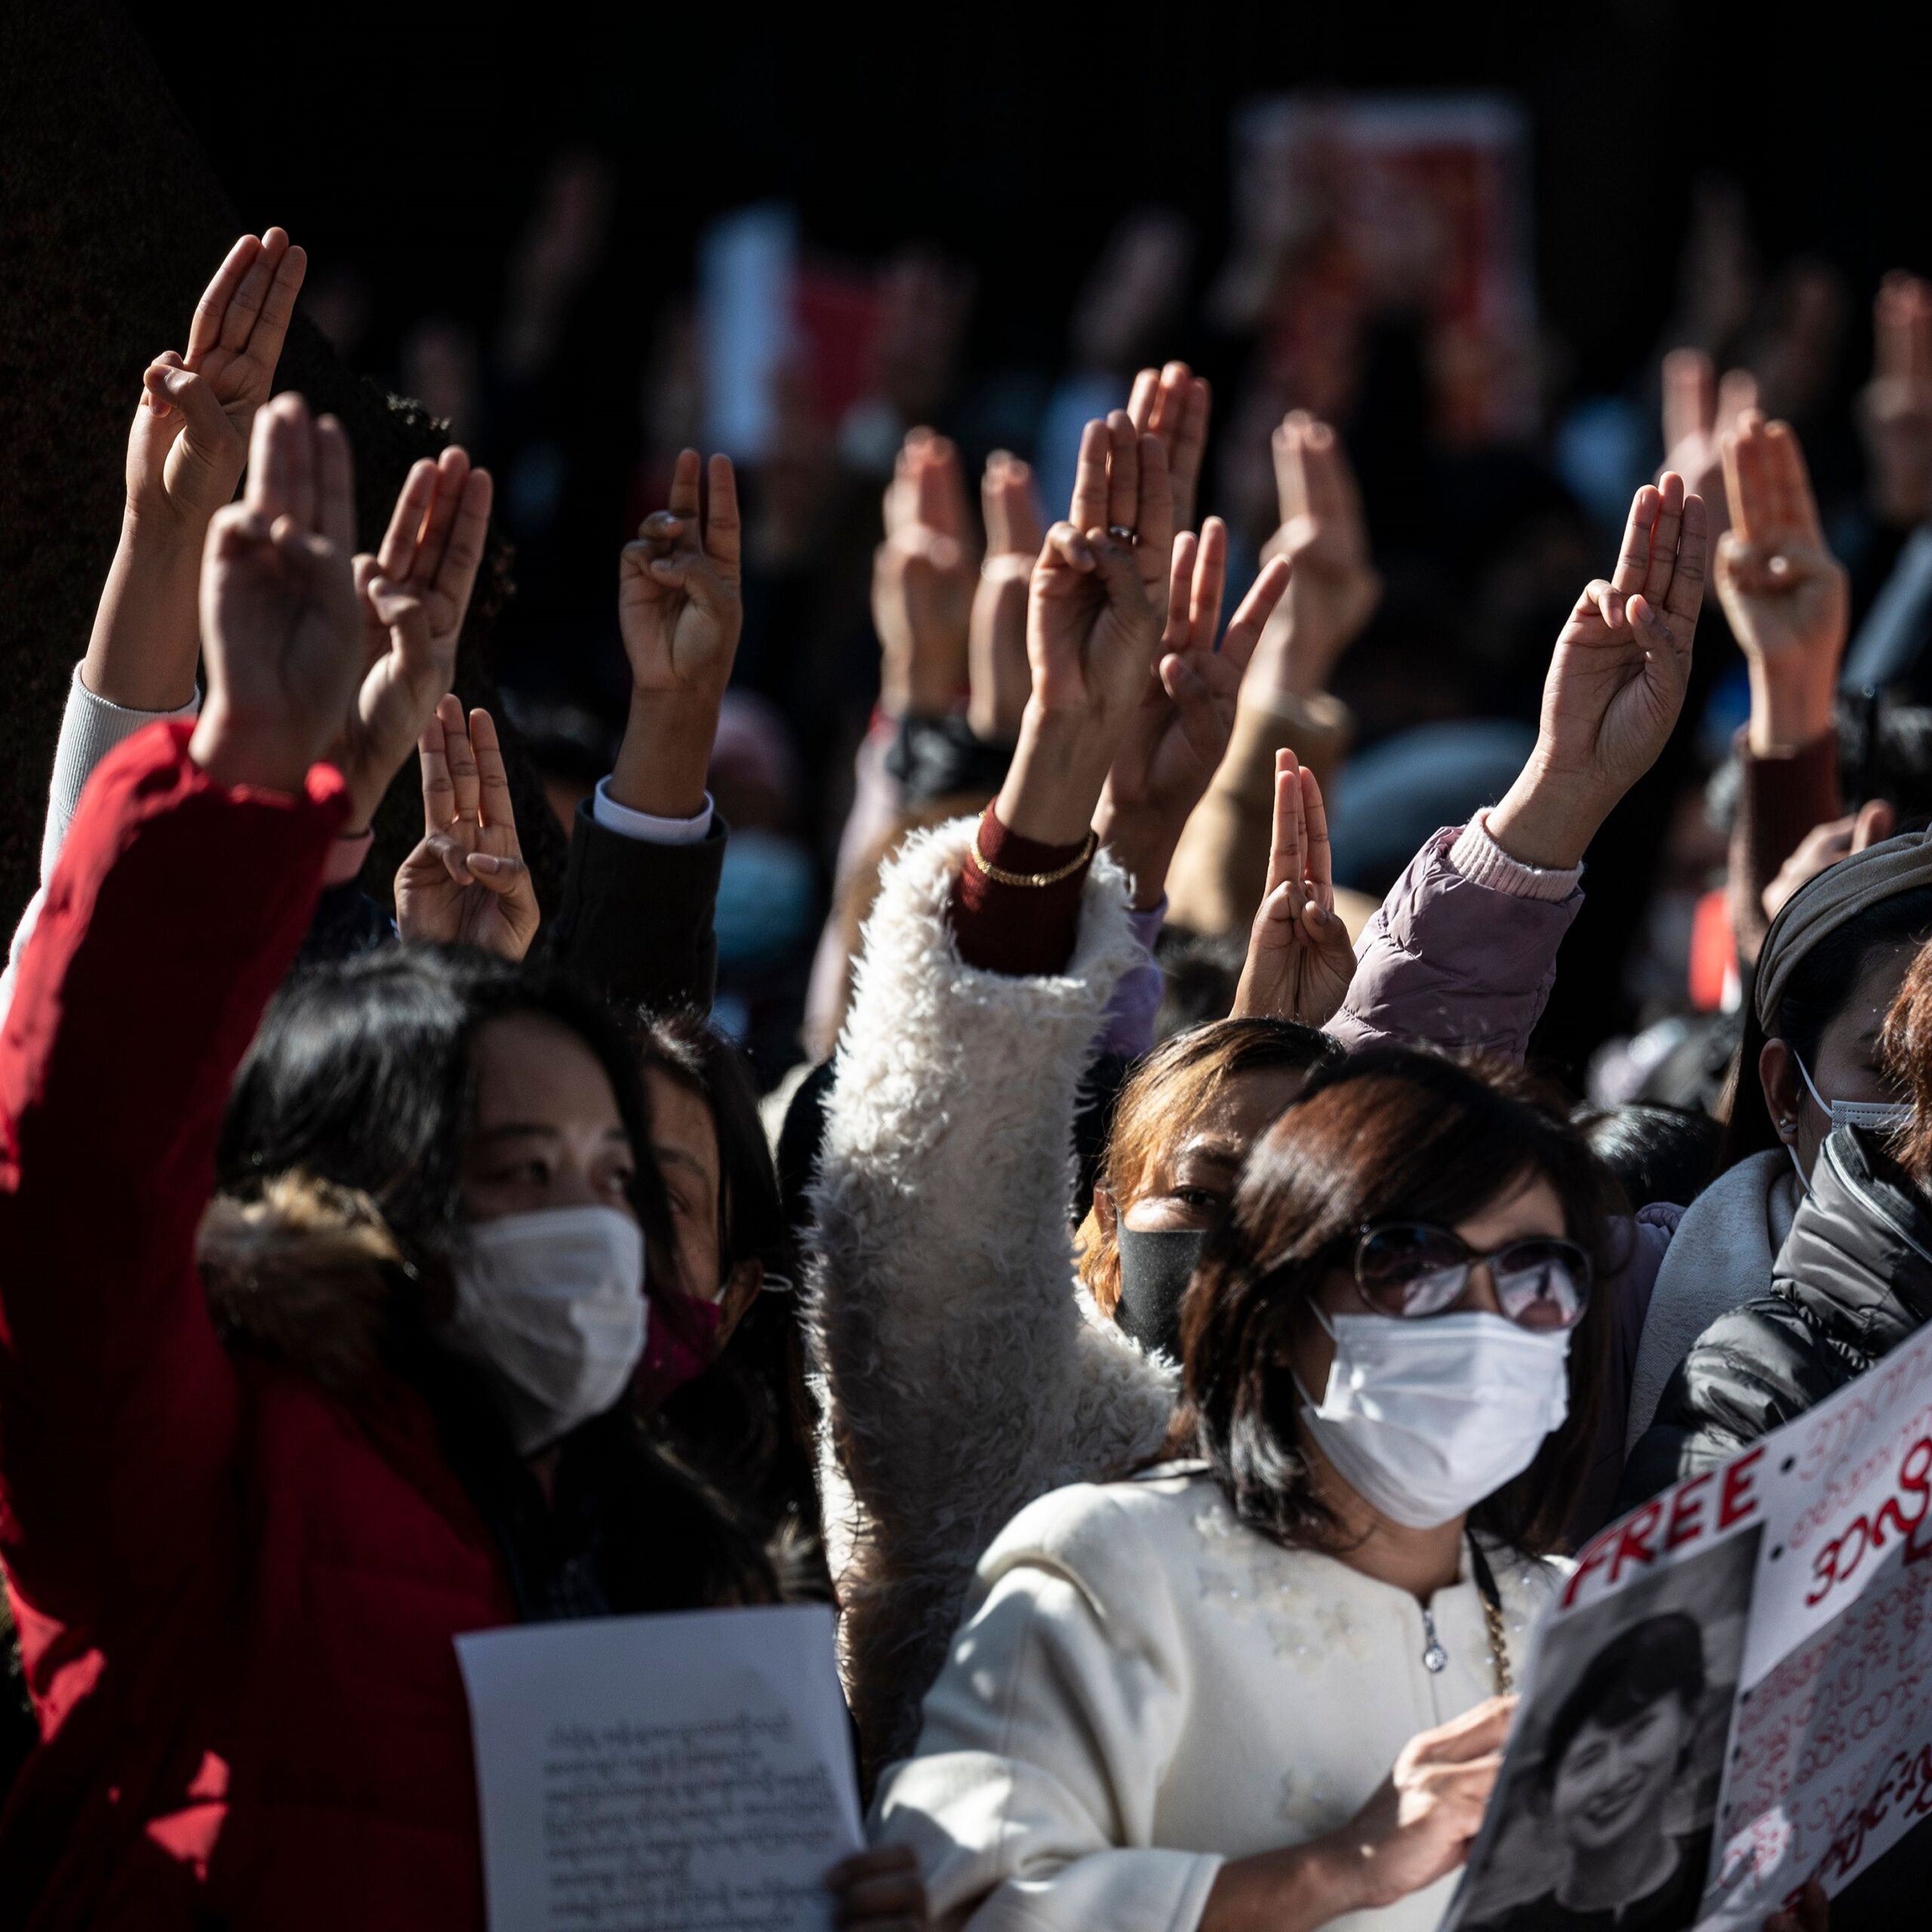 Myanmar activists gesture three-finger salutes as they protest outside the Myanmar embassy in Tokyo on February 7, 2021. Photo by PHILIP FONG/AFP via Getty Images